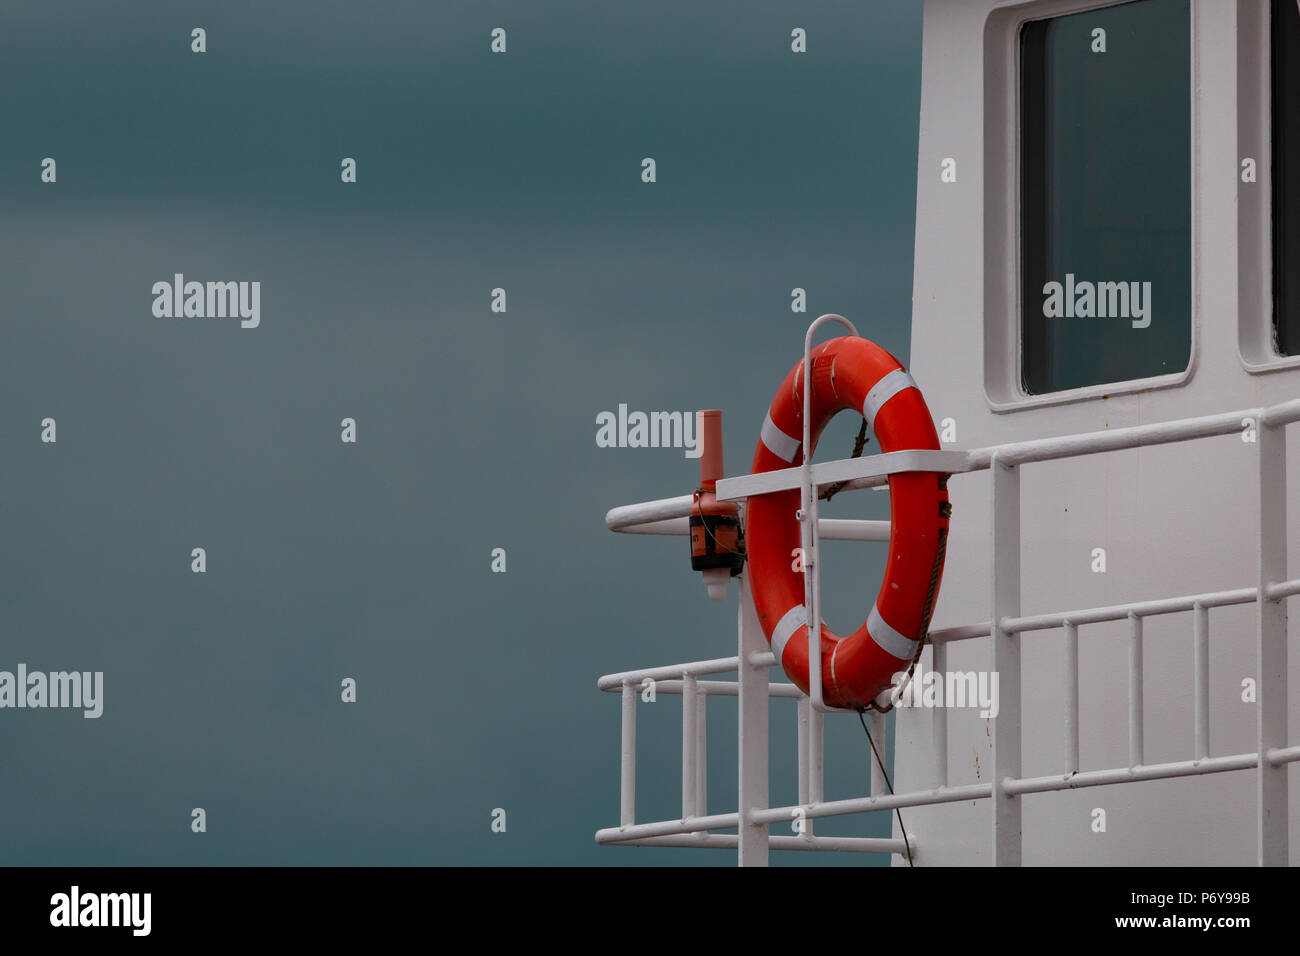 Lifesaver on the side of a ferry Stock Photo